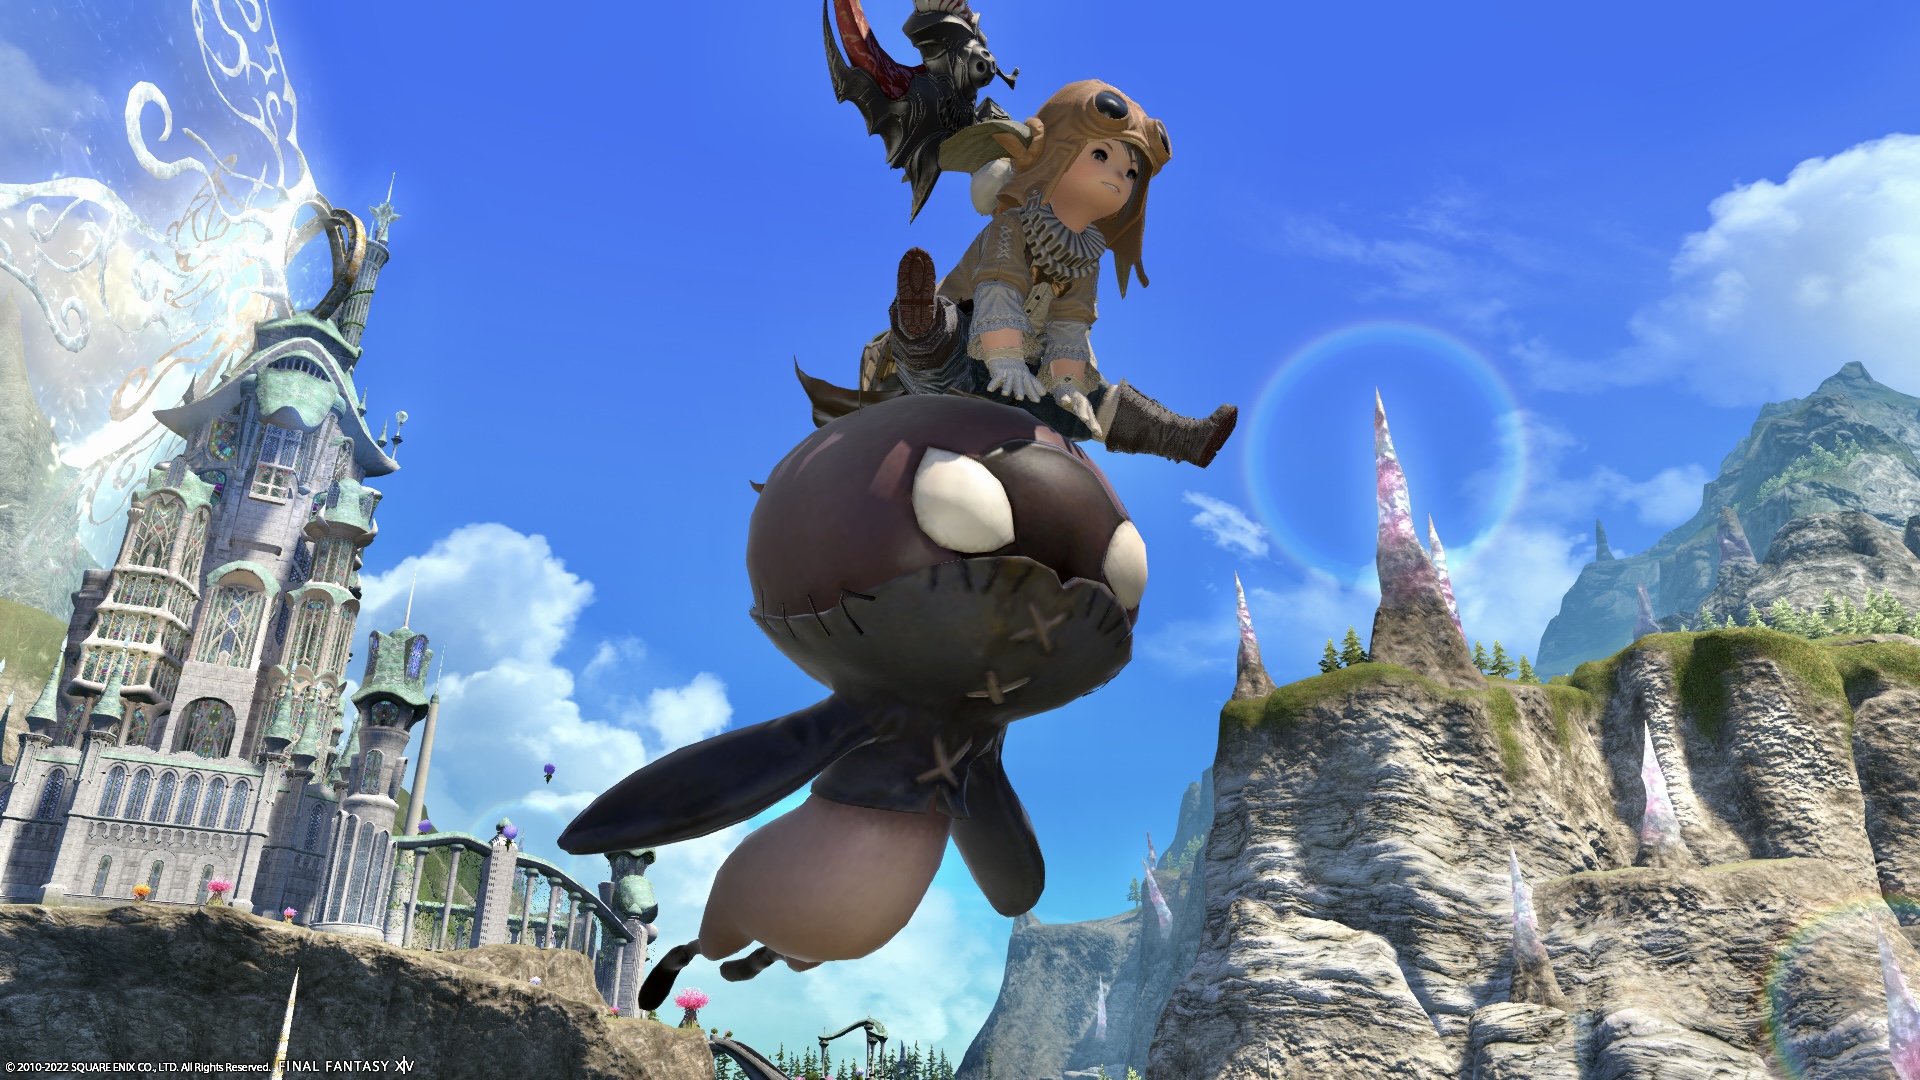 The island sanctuary's angry face eggplant mount “Island Eggplant Knight” |  Norirow Note Eorzean adventure story in FF14